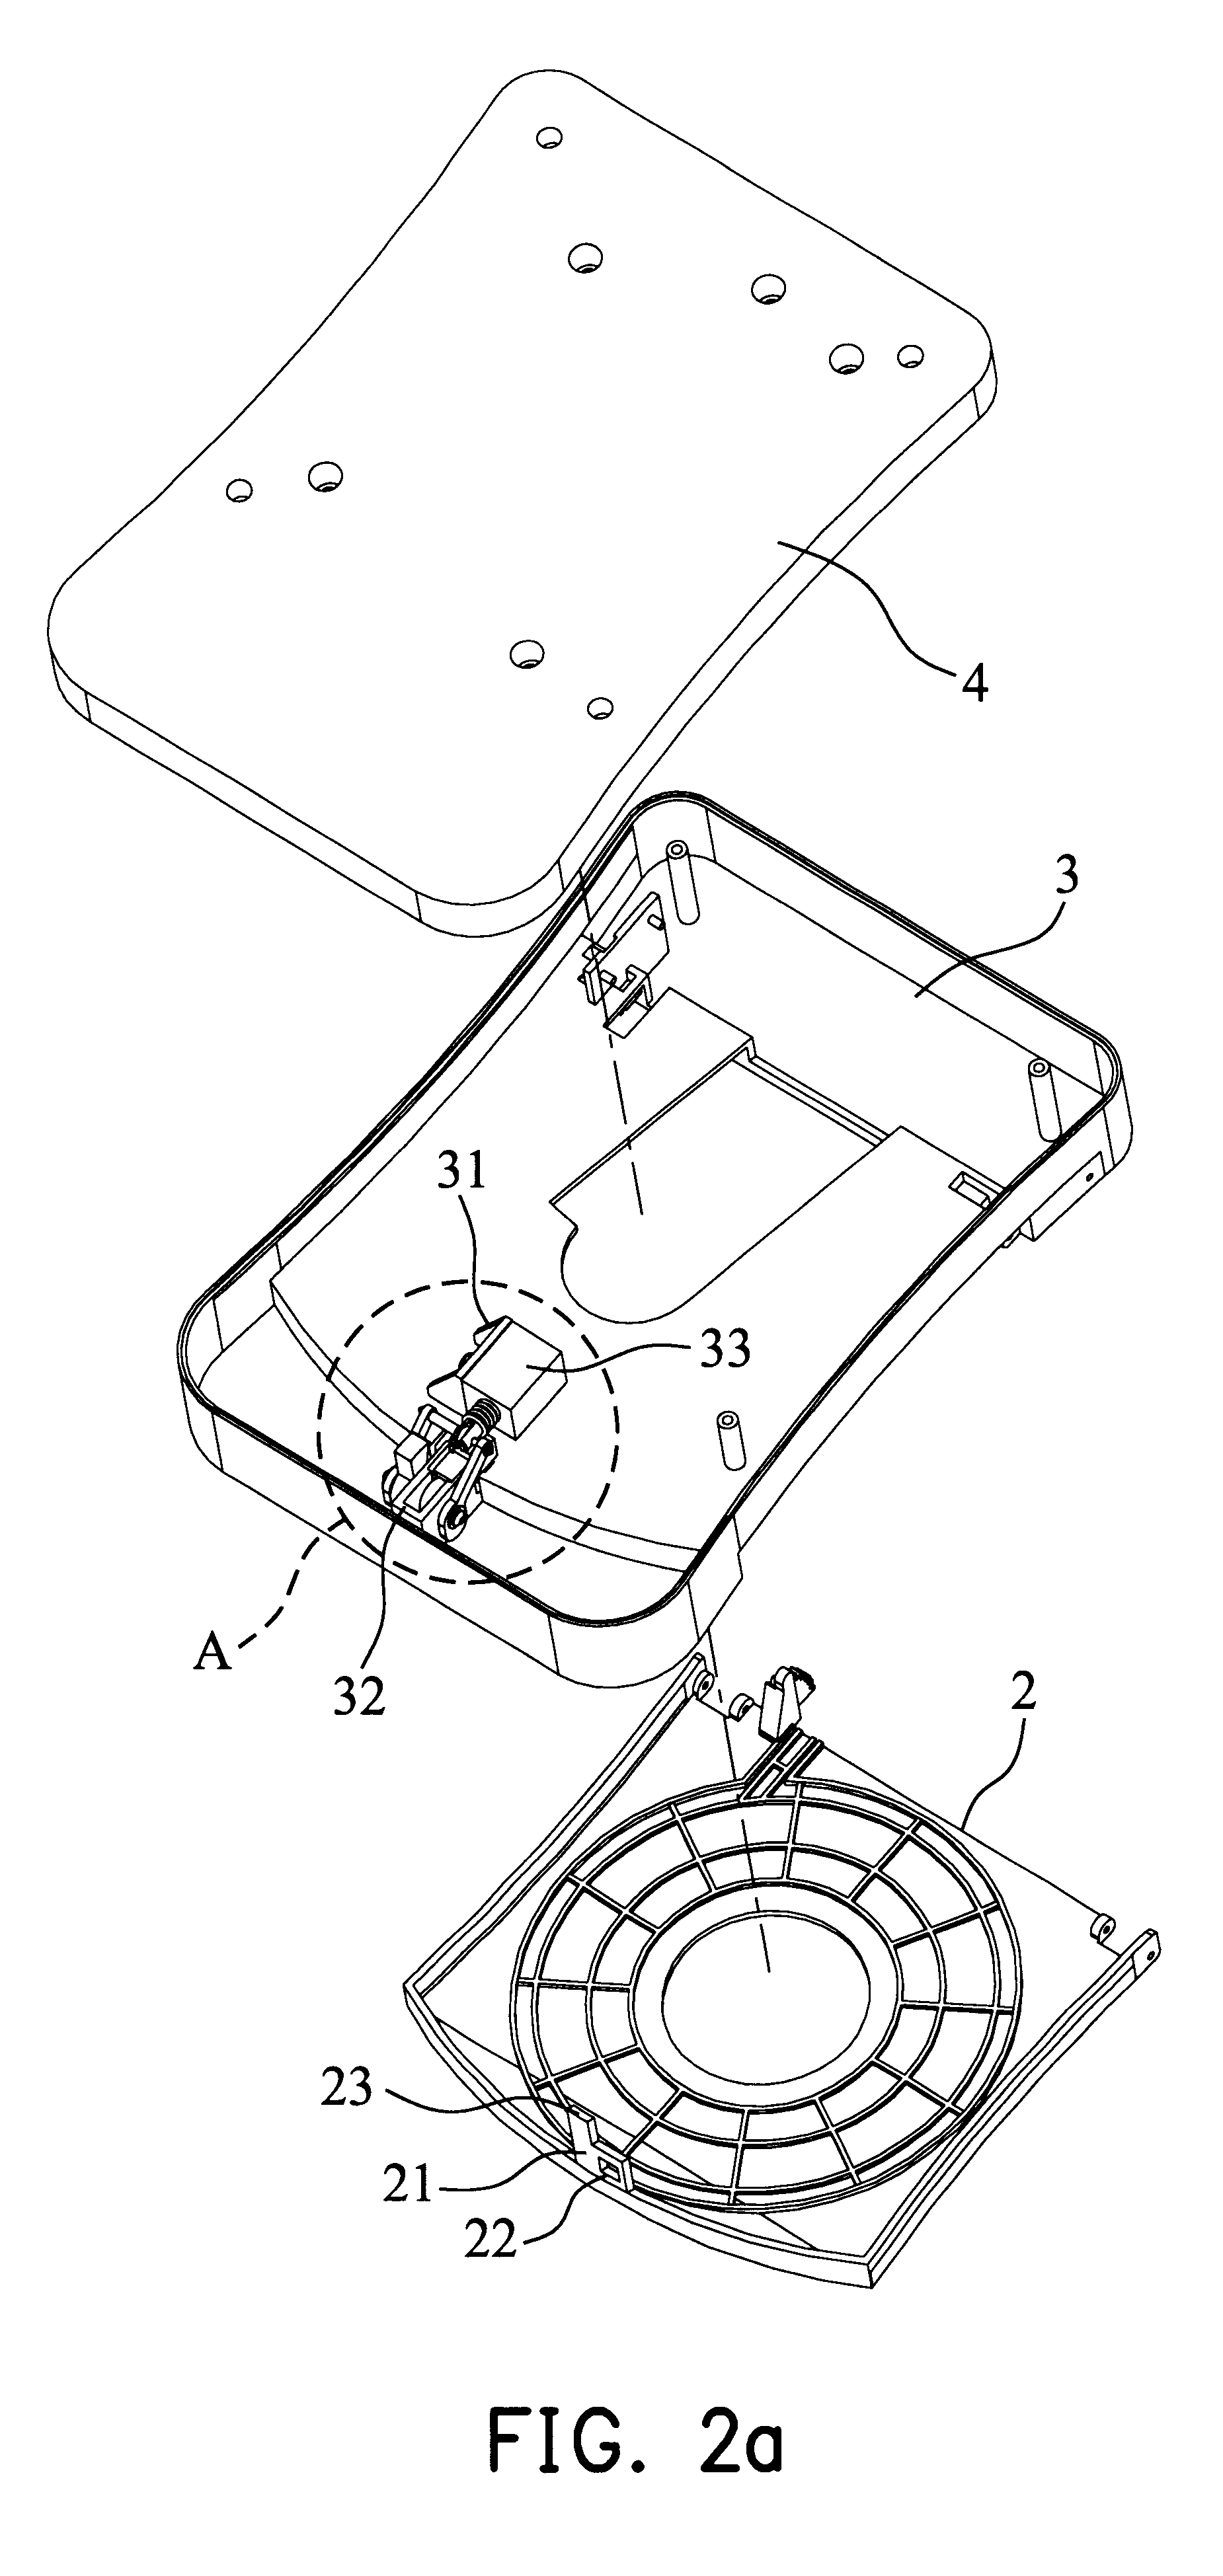 Cover-locking device for optical disk drive